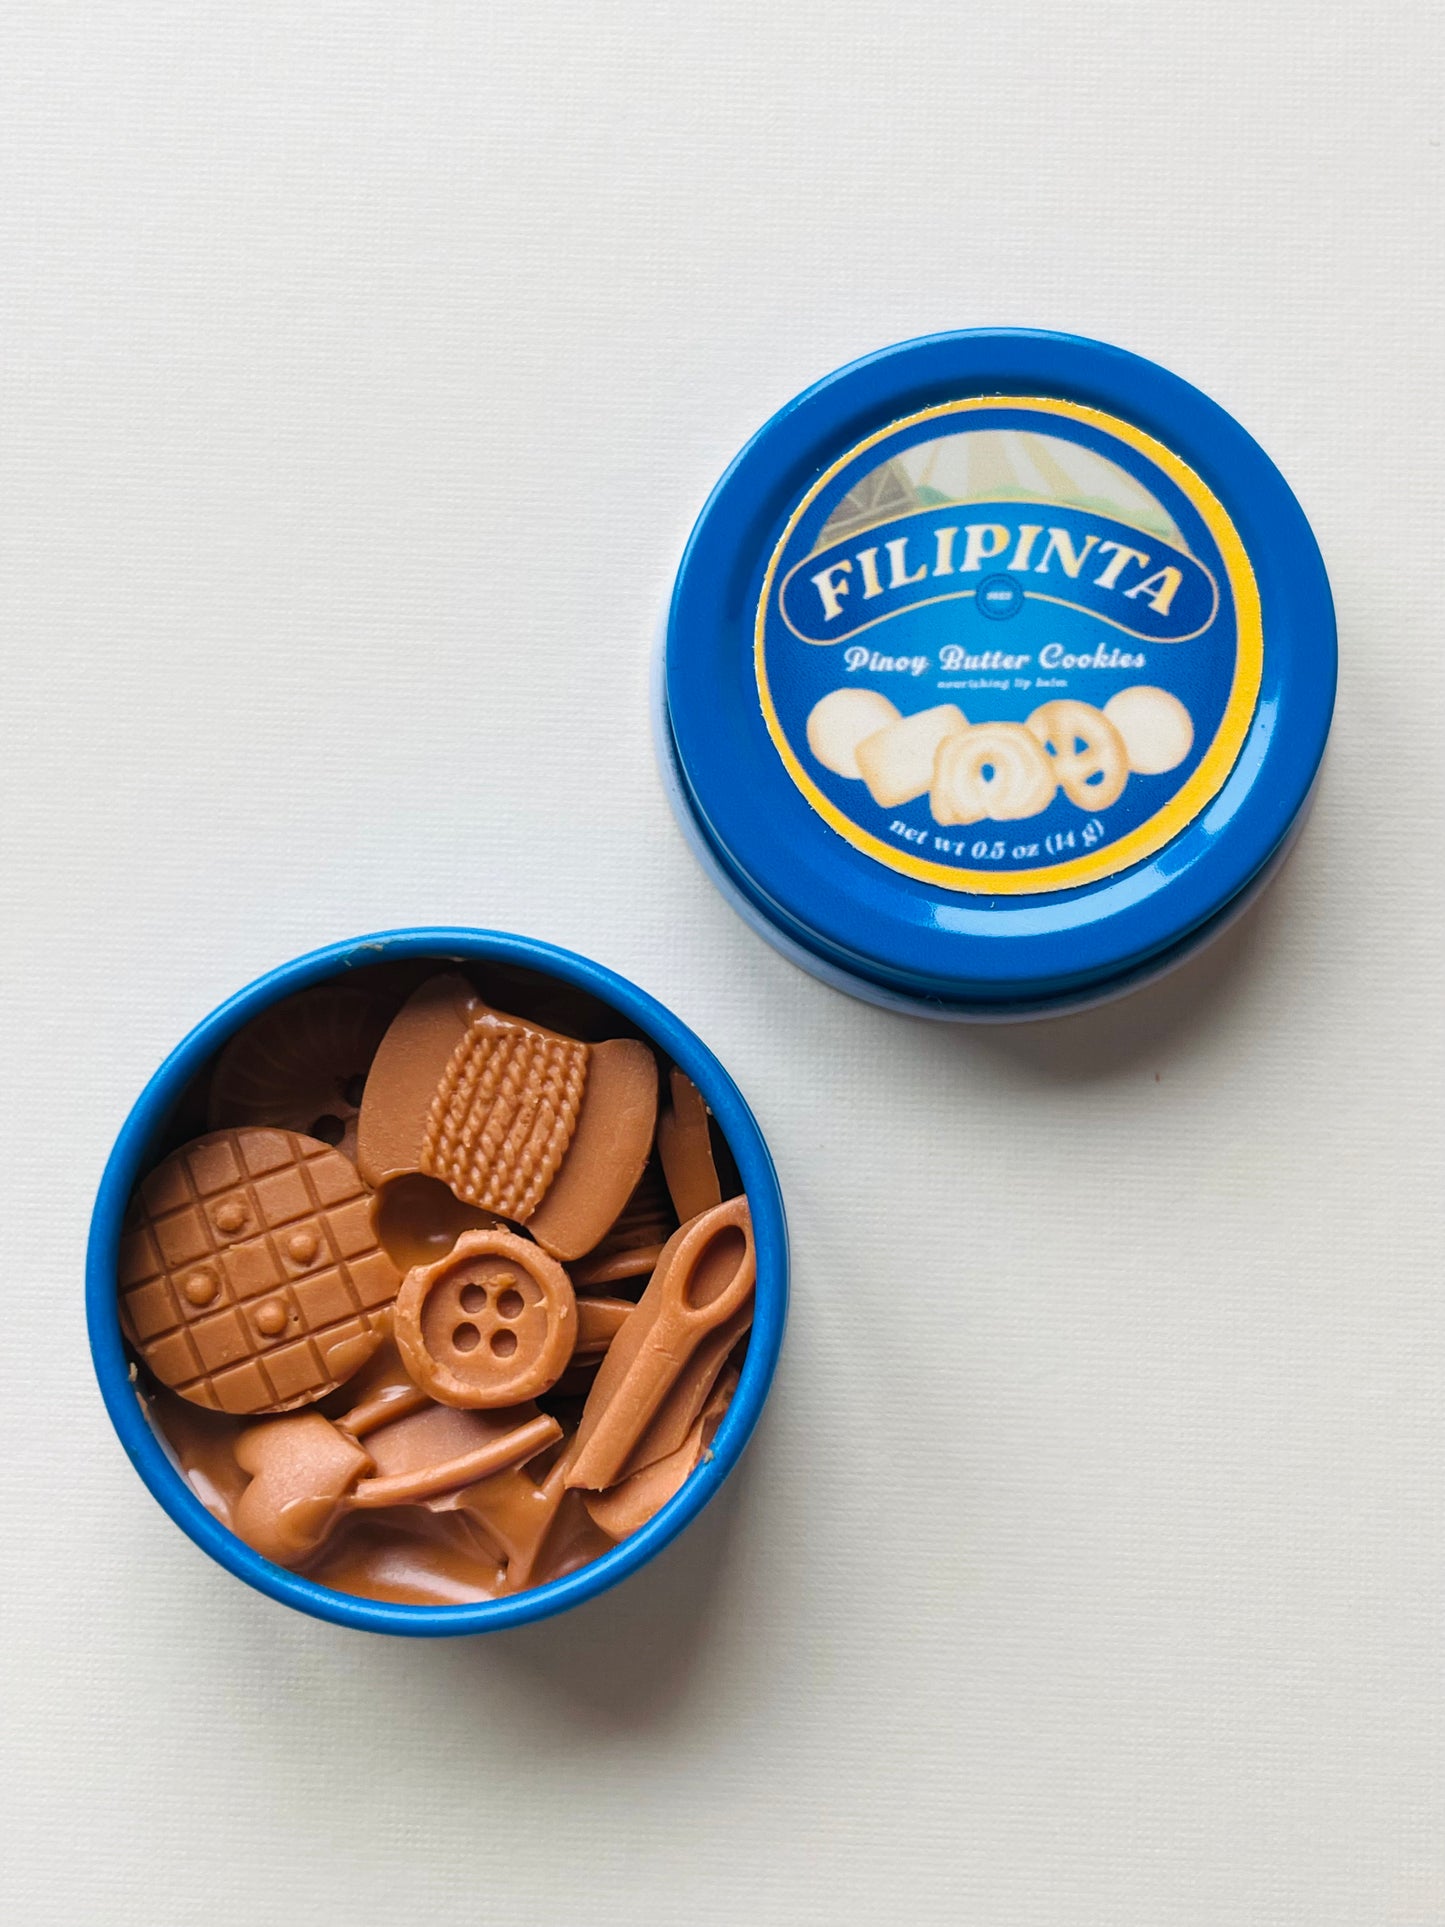 Pinoy Butter Cookies lip balm